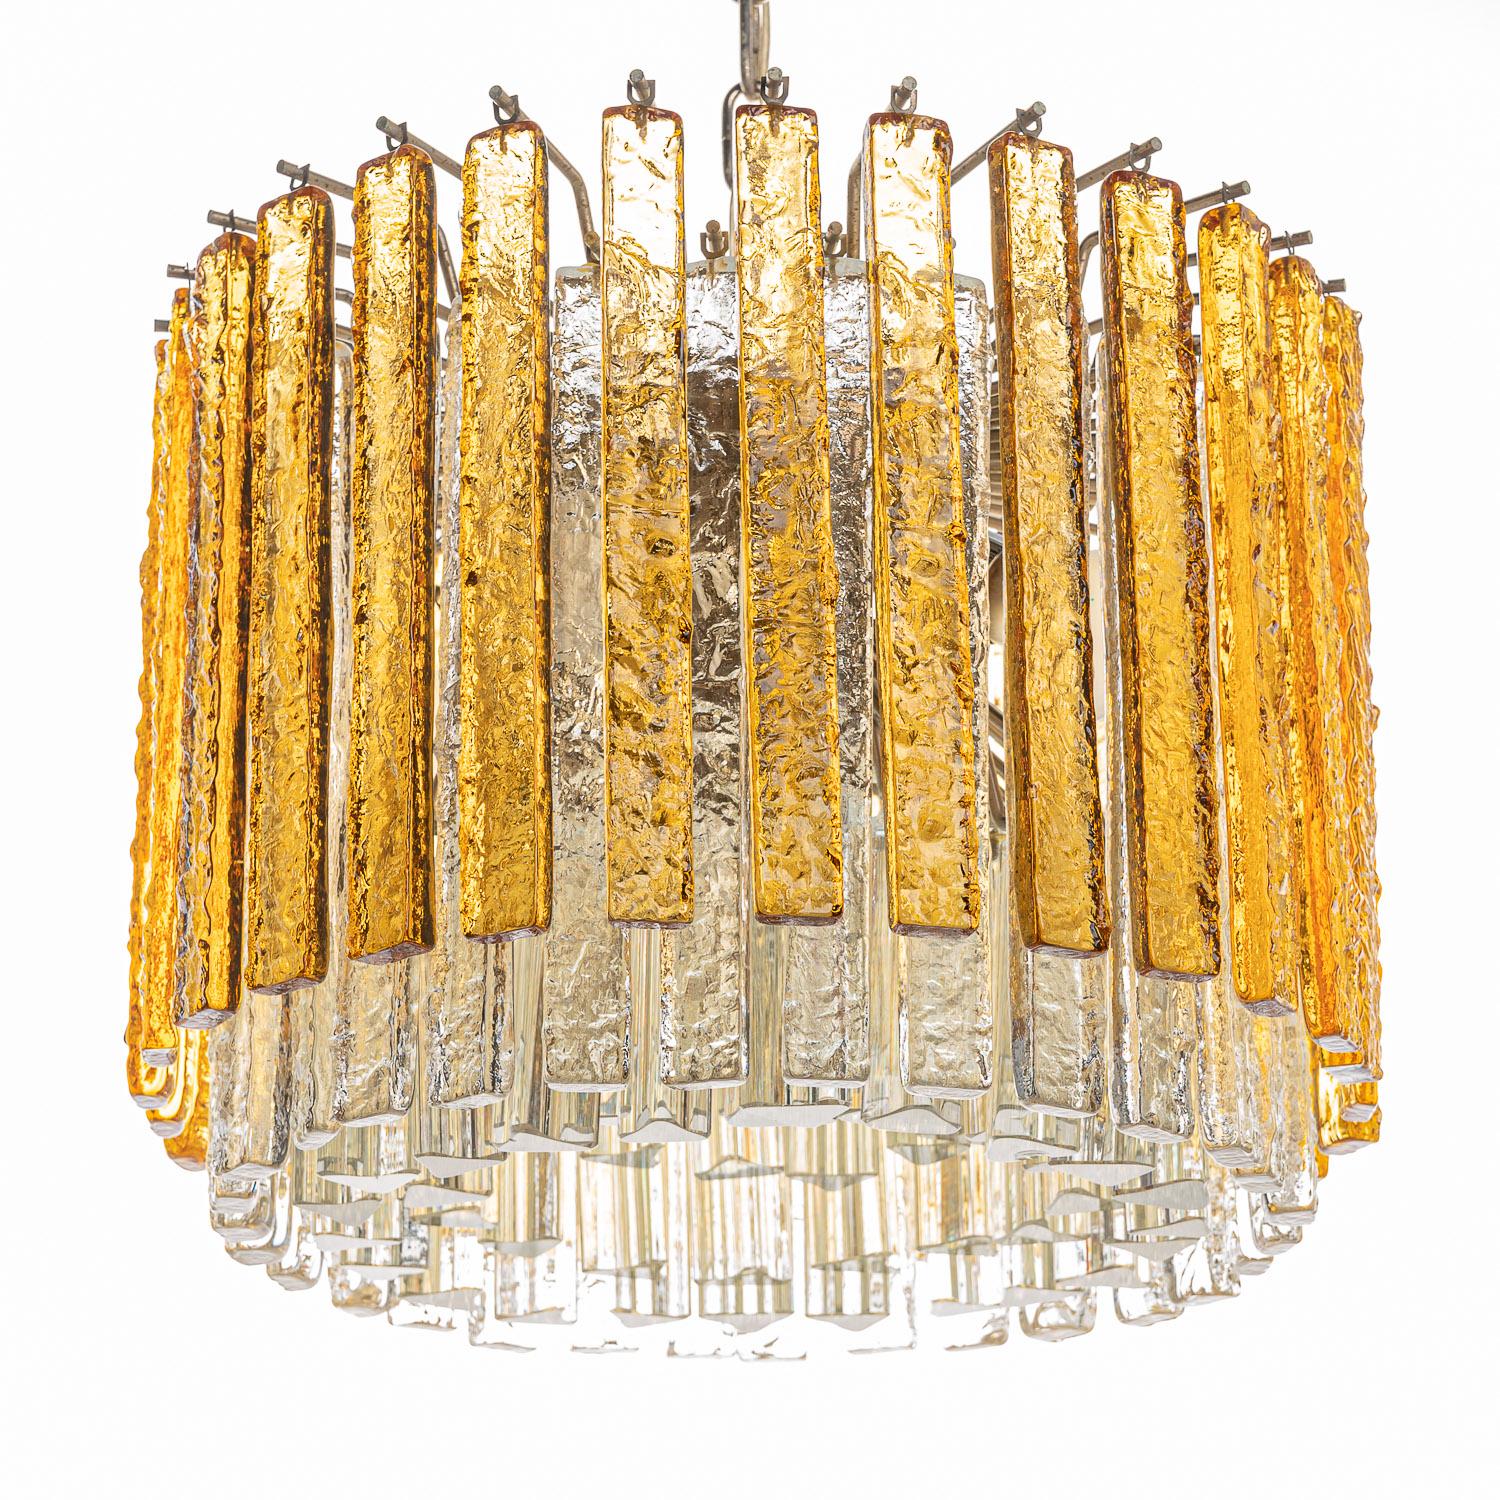 Looking for lighting that makes an impression? From the chrome chain and canopy, underneath we get to a spectacular combination of hanging crystal-glass bars 117 Quadriedri- shaped and 60 flat bars with a relief front, 30 x Clear and 30 x amber